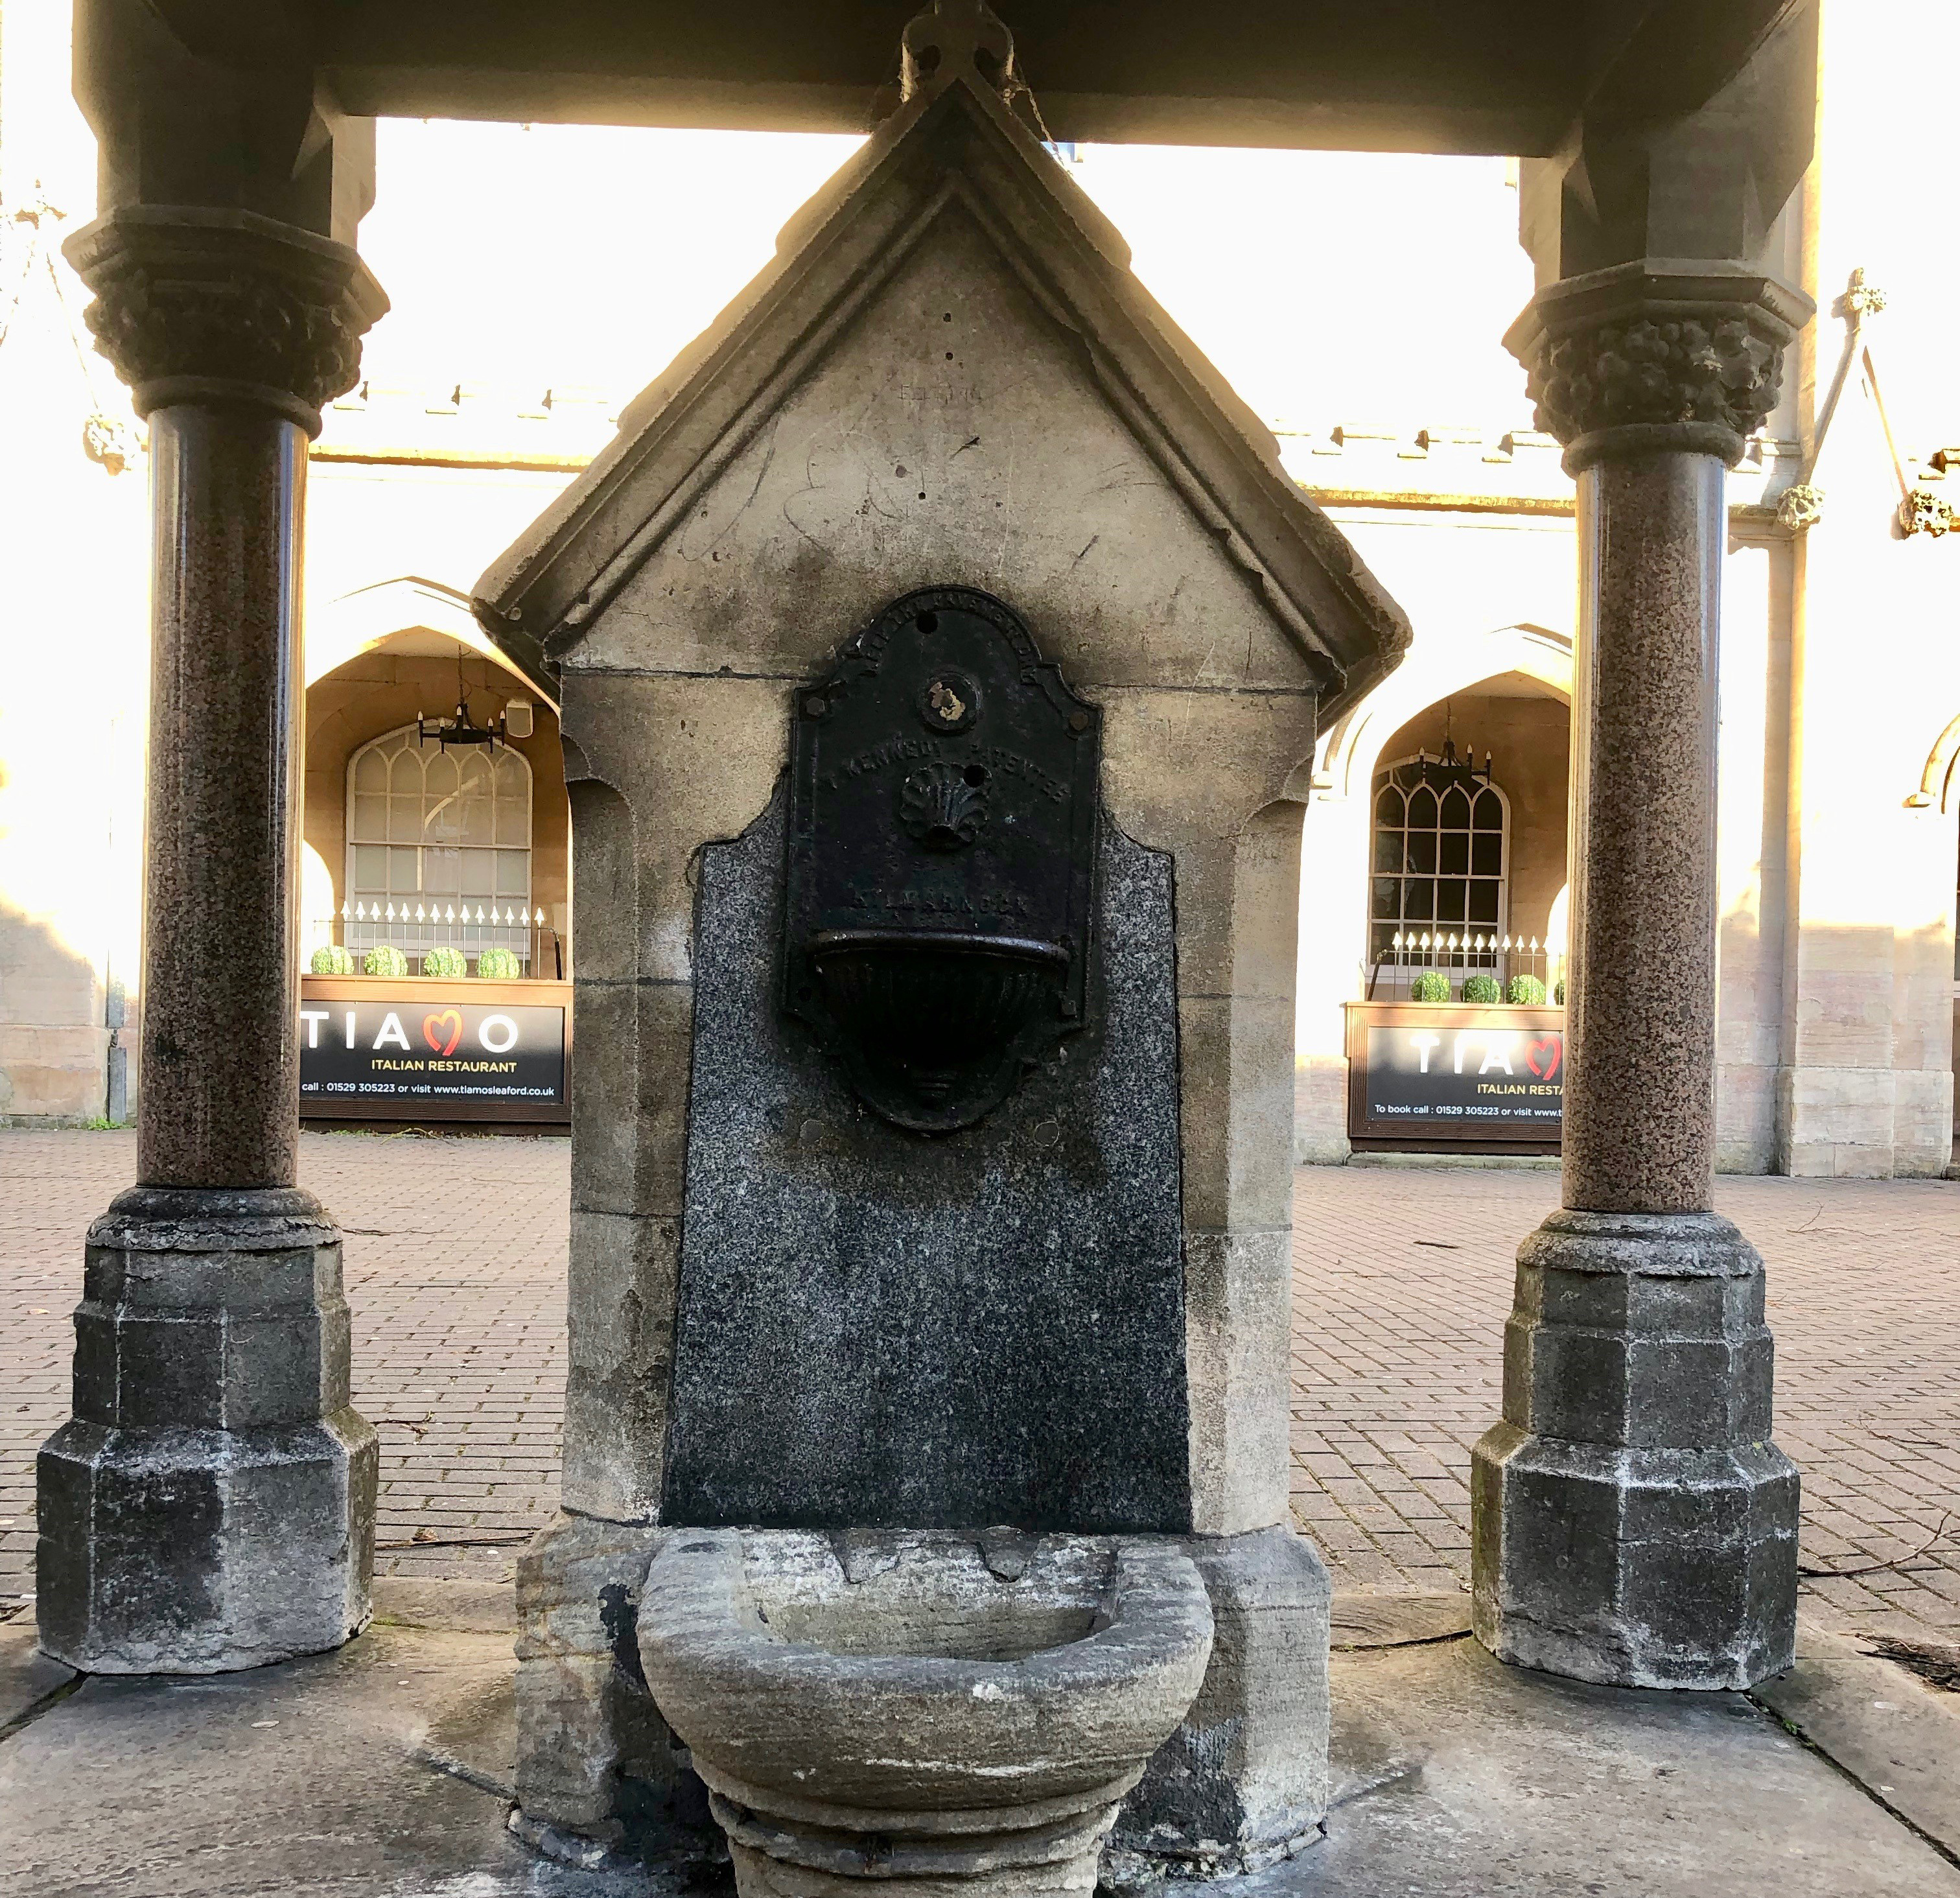 The water fountain in Sleaford